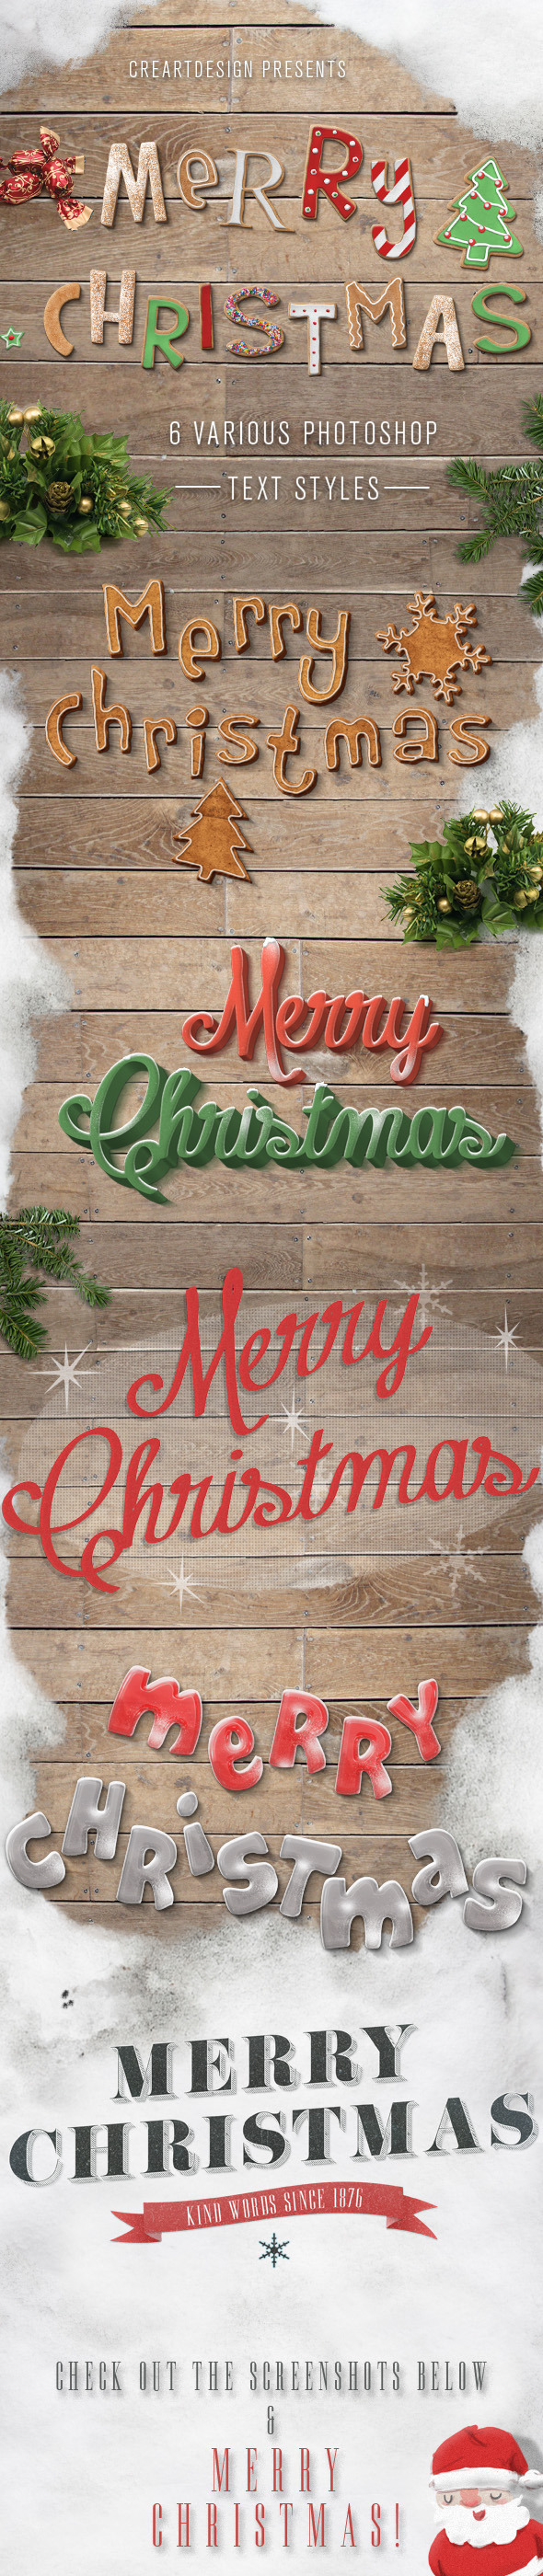 free christmas photoshop styles text effects